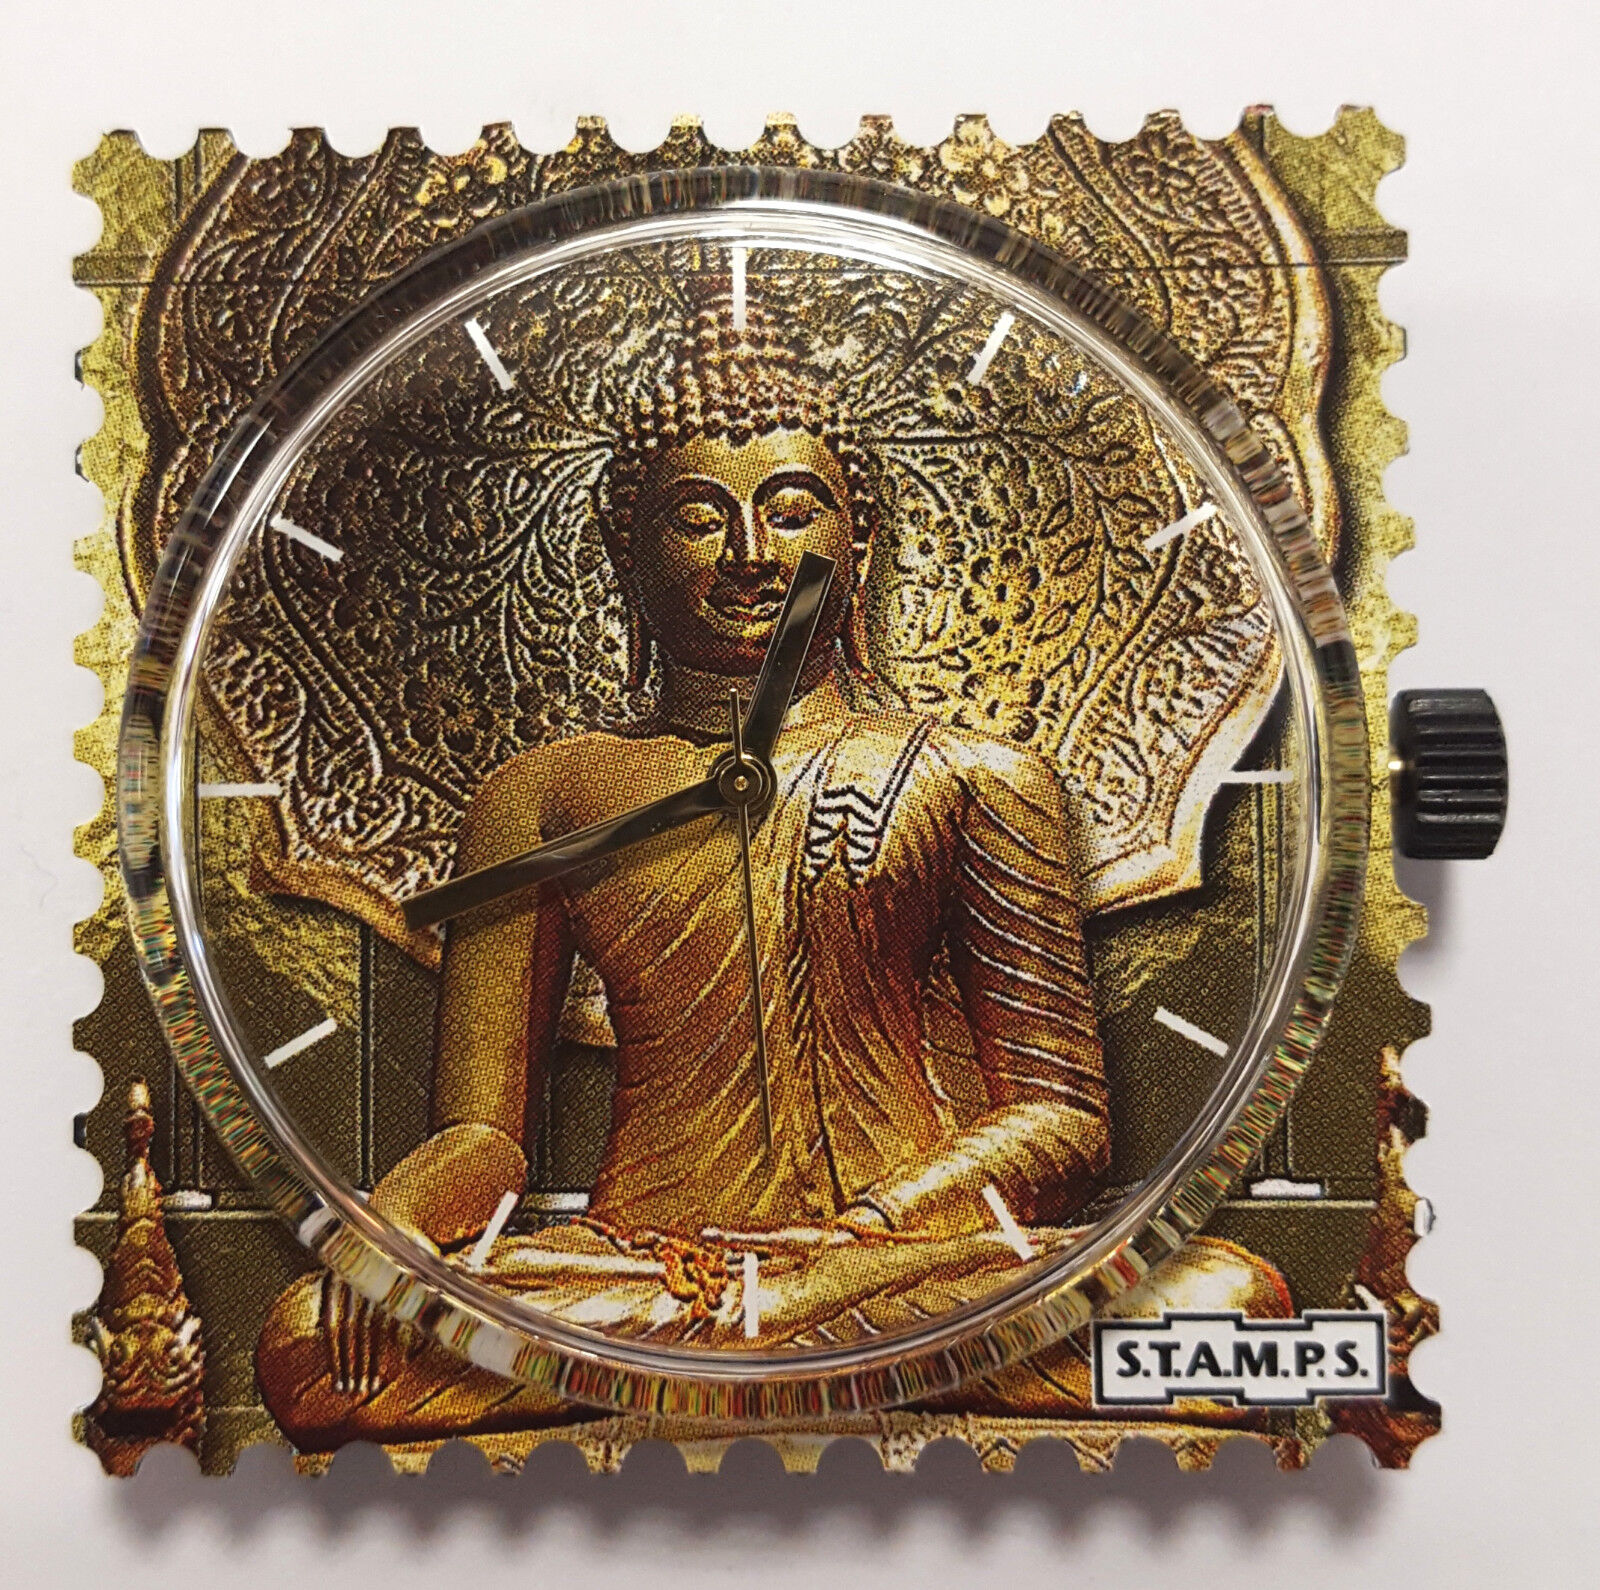 Buy Clock With Buddha, Religious Articles, Buddhism, Personalized Clock,  Personalized Gift, Gift With Photo, Original Gift, Gift Idea Online in  India - Etsy